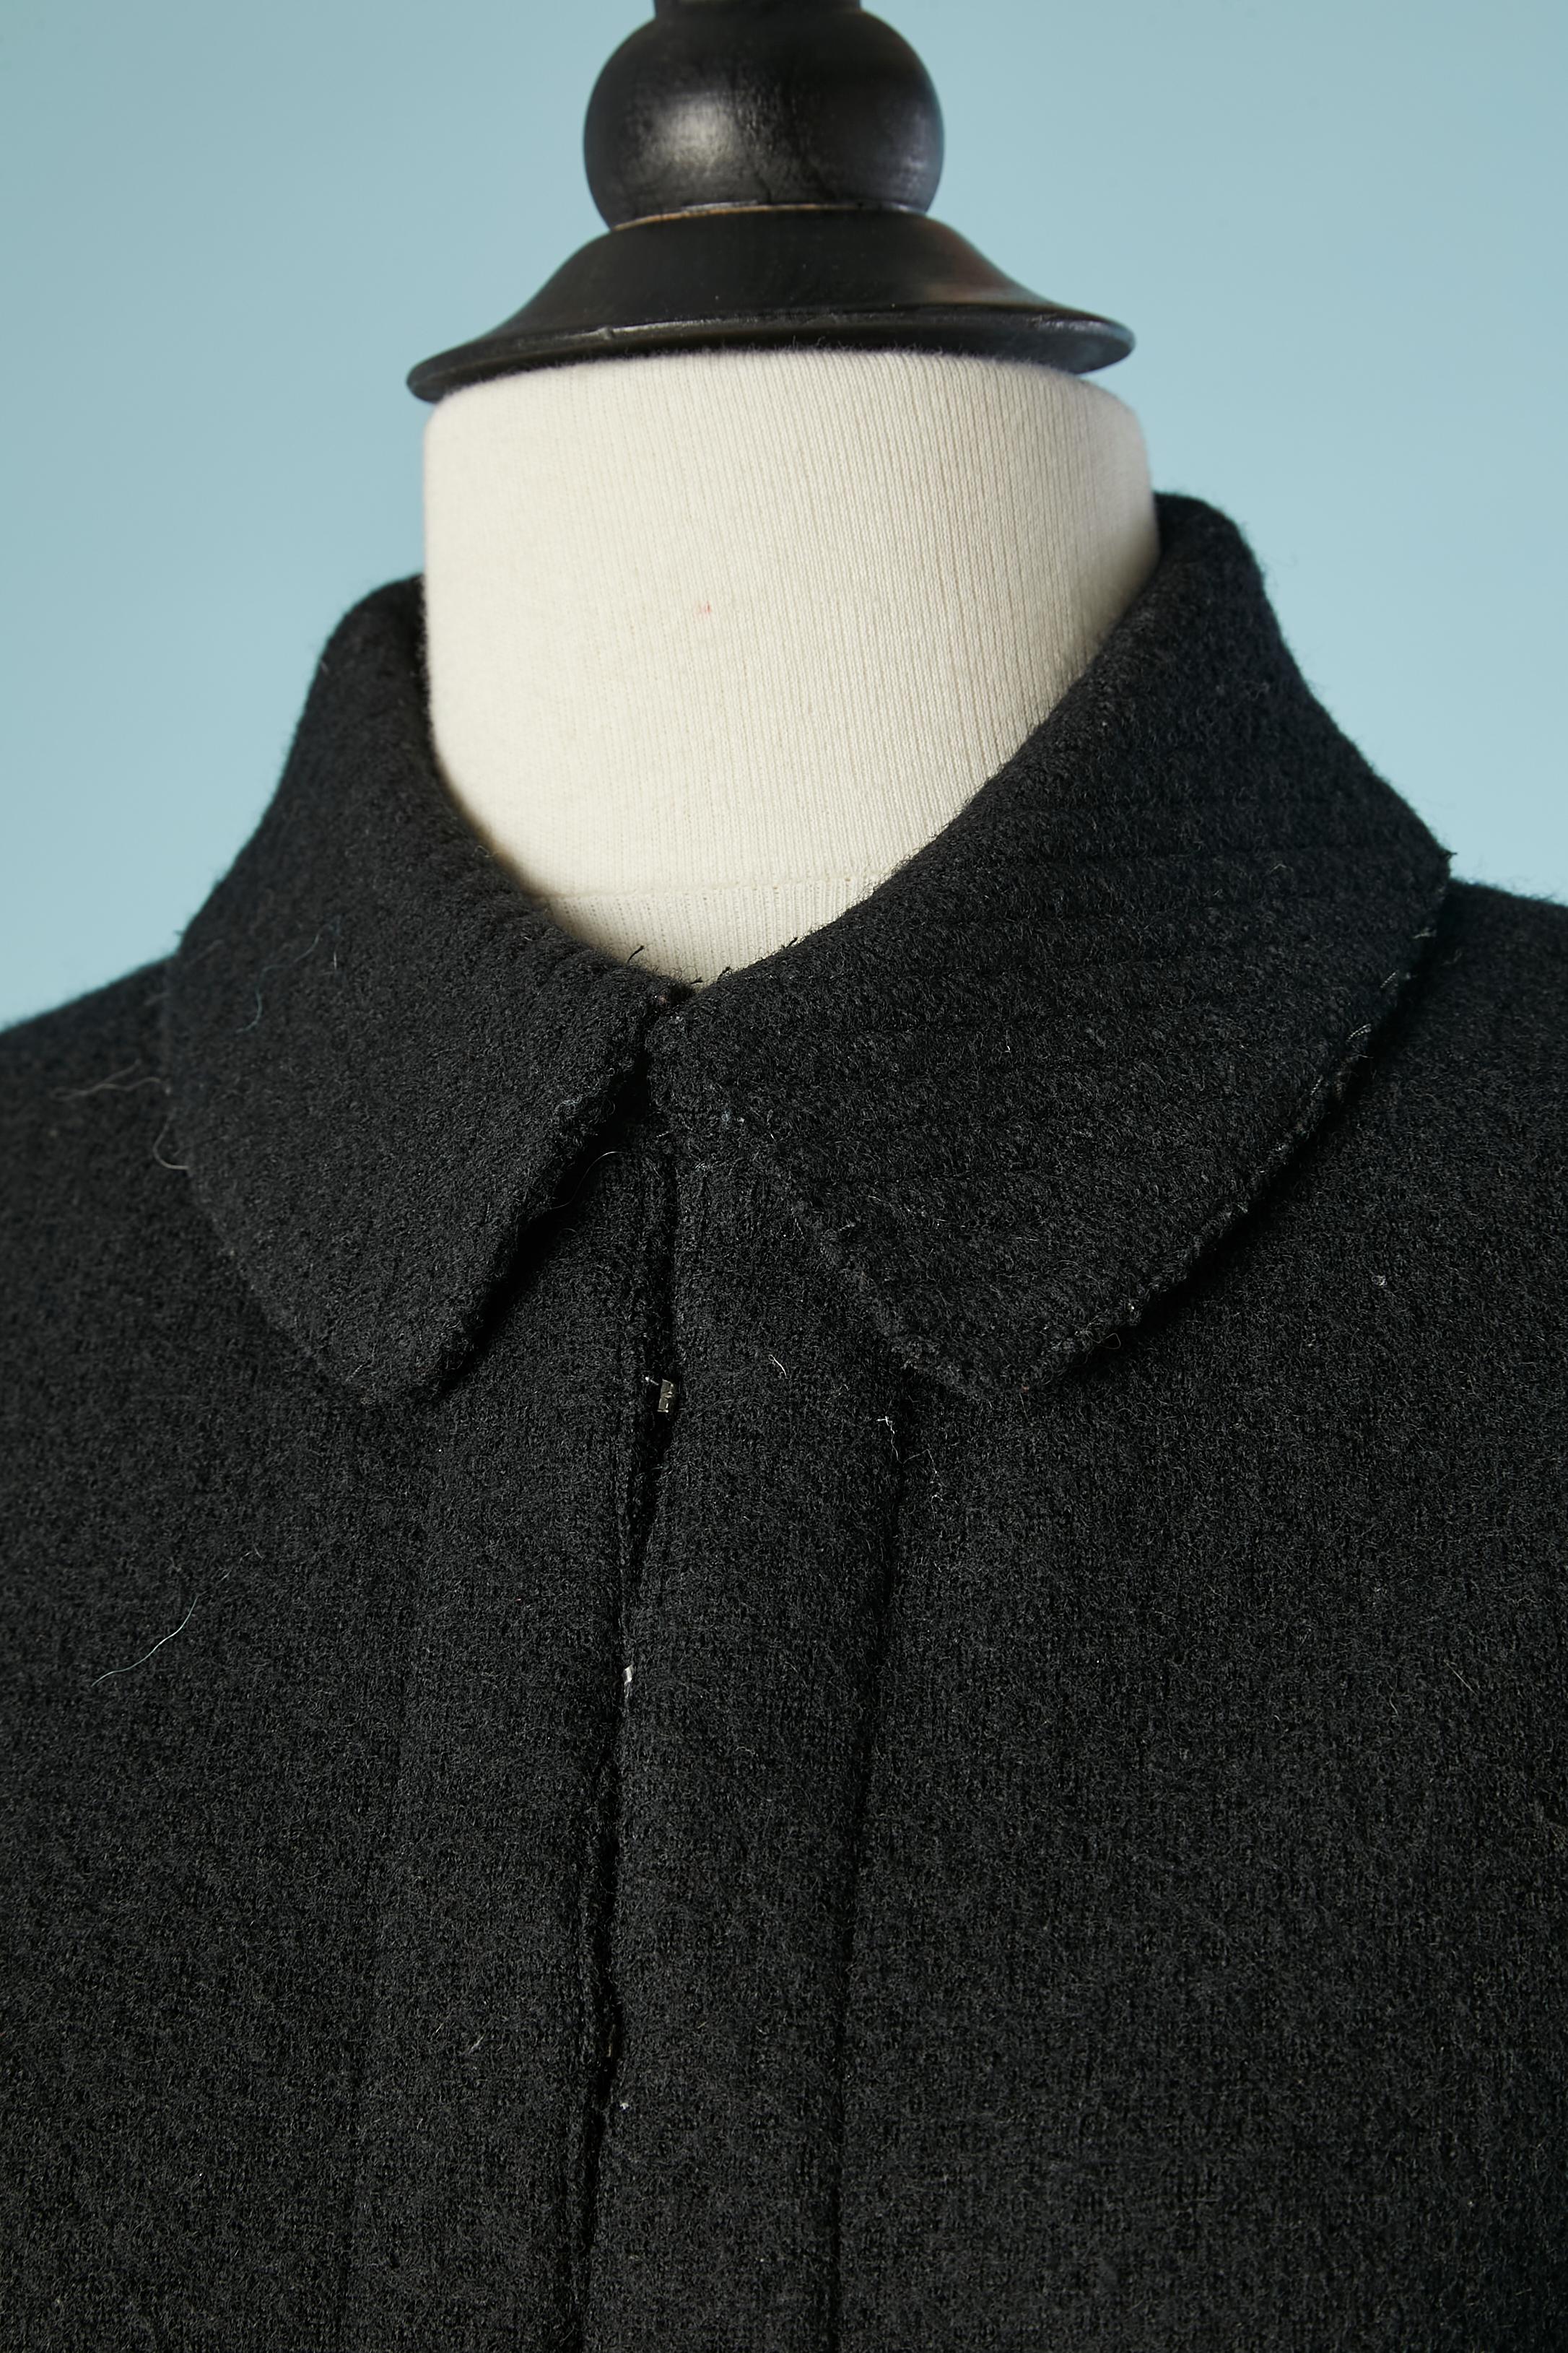 Black wool knit skirt-suit with edge to edge jacket and top-stitched collar and pocket-flap. 
SIZE 38 (M) 